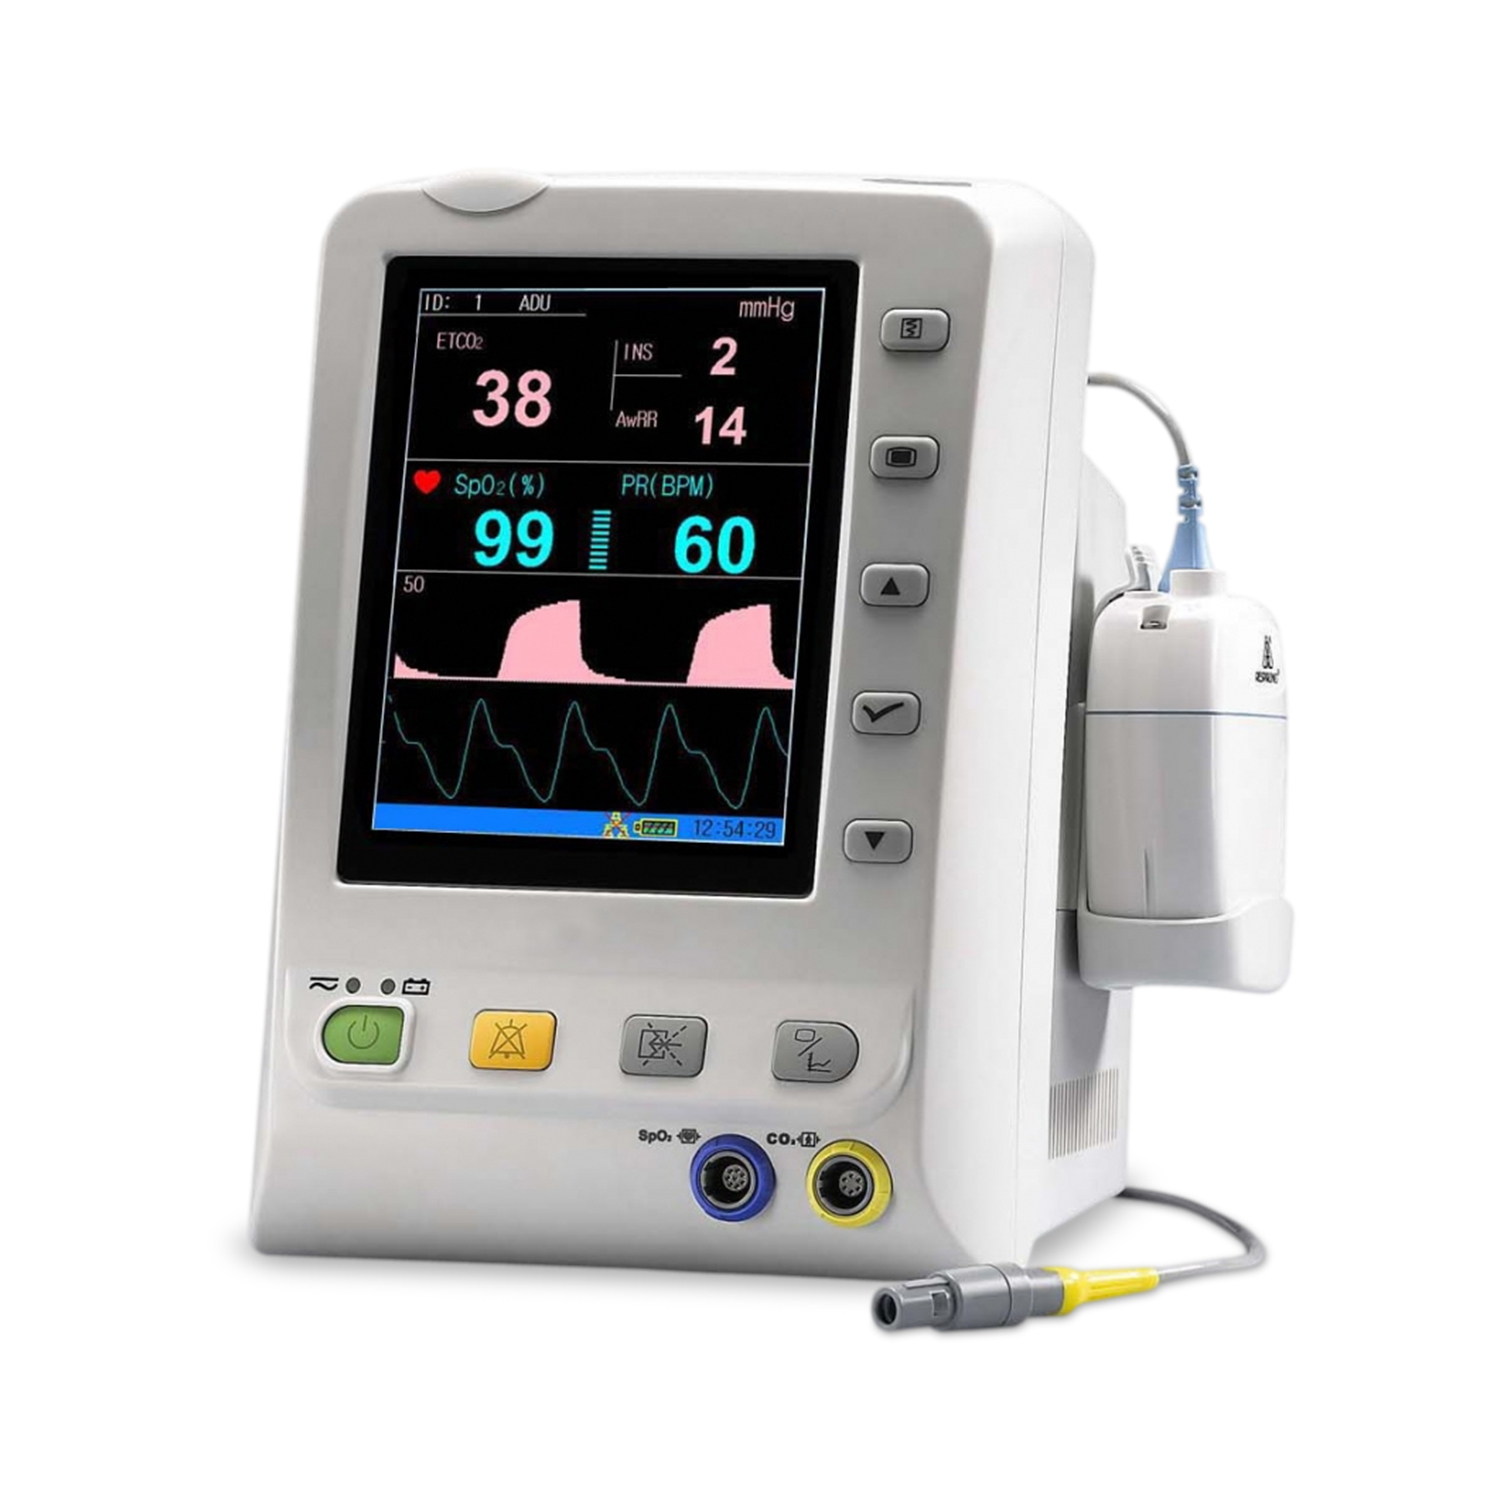 Global Capnography Equipment Market – Global Industry Analysis and Forecast (2018-2026)